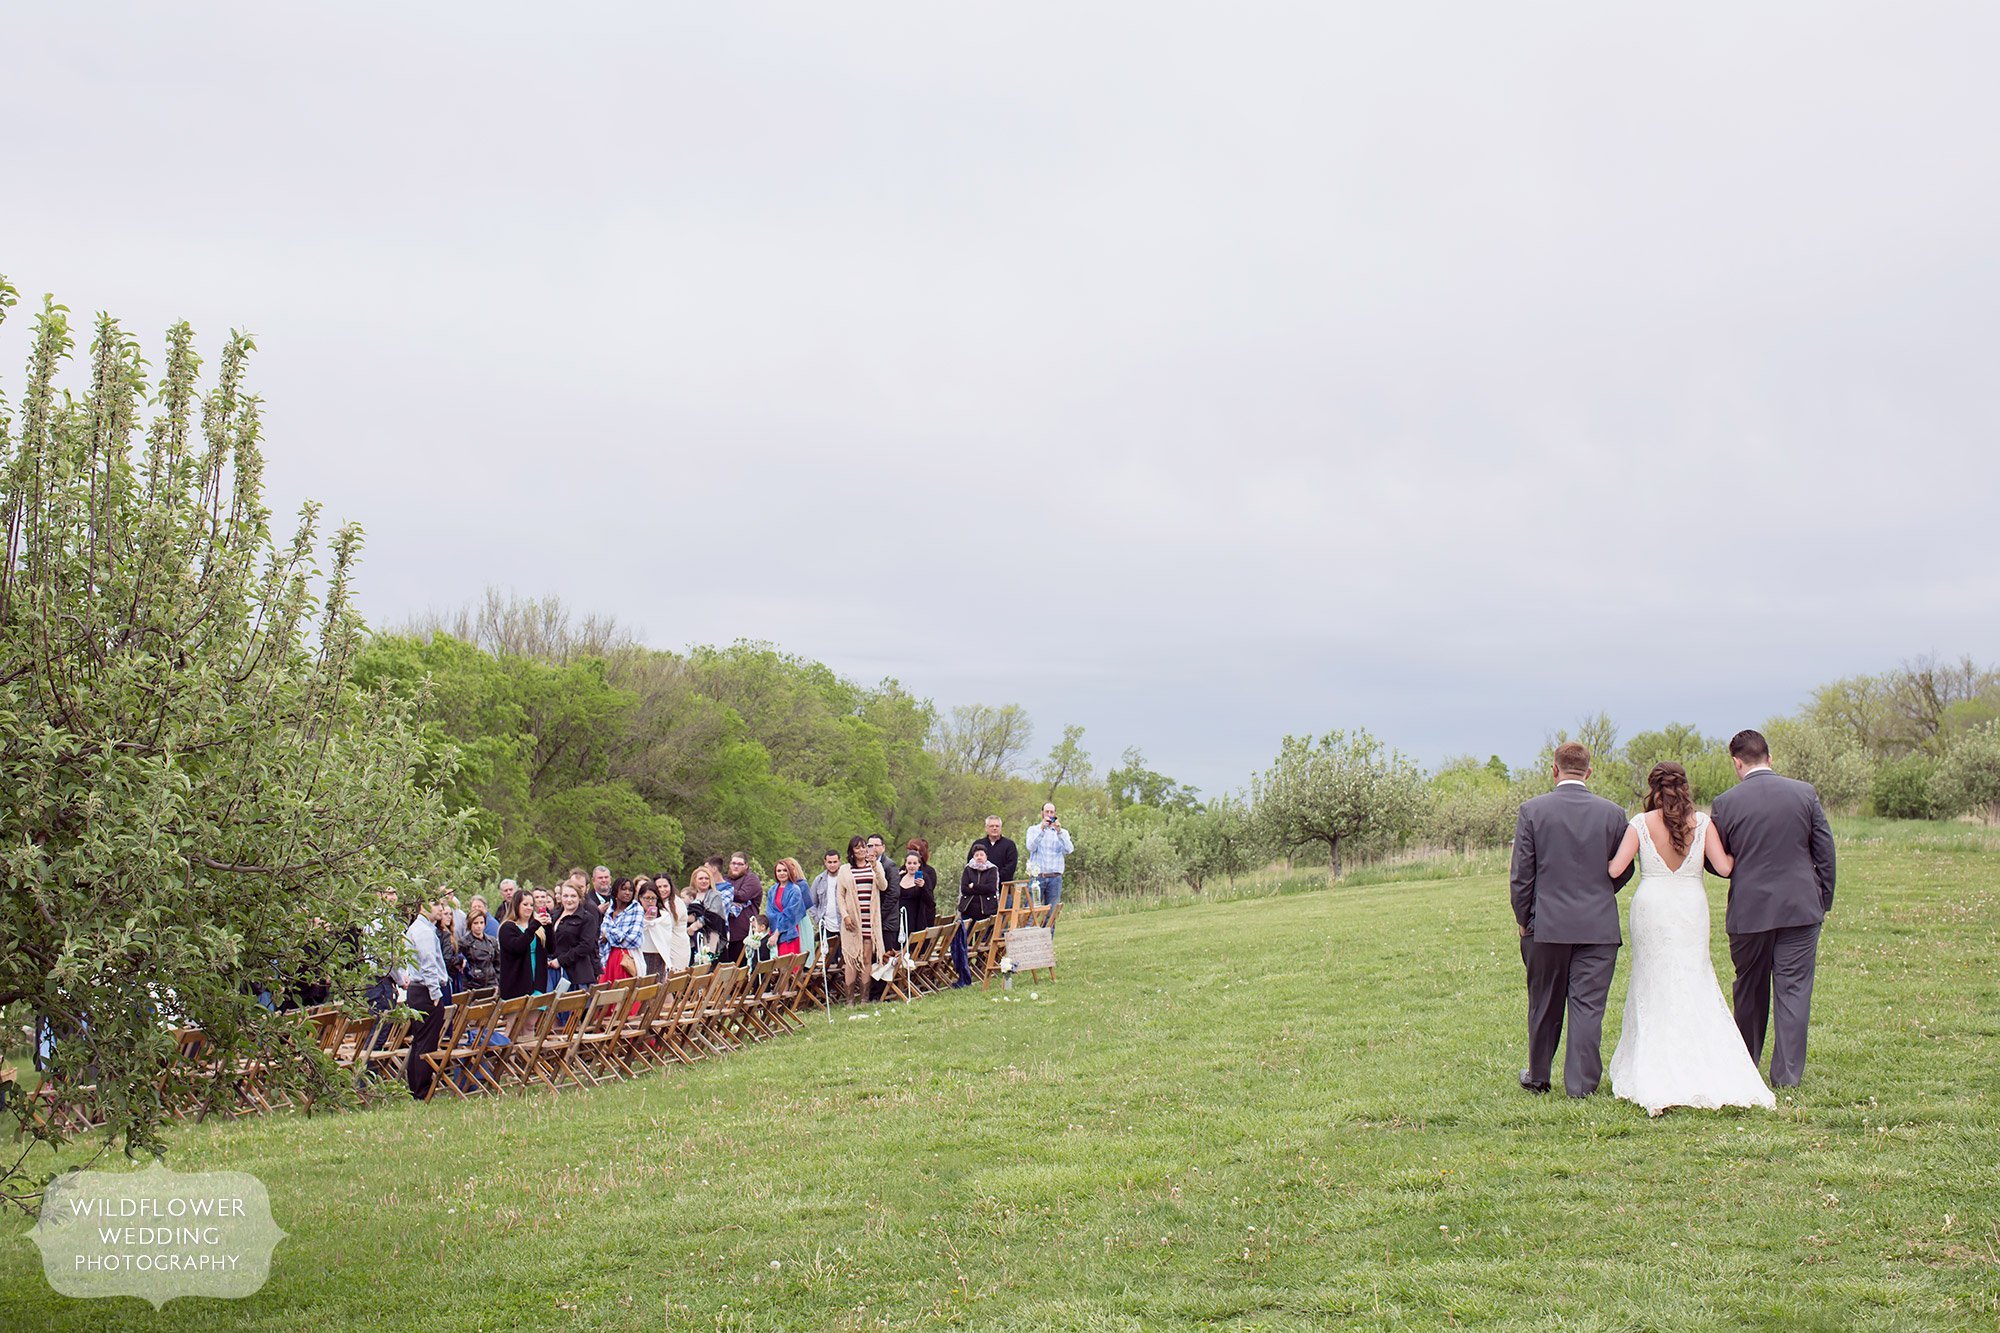 Outdoor orchard wedding venue just north of KC in MO.